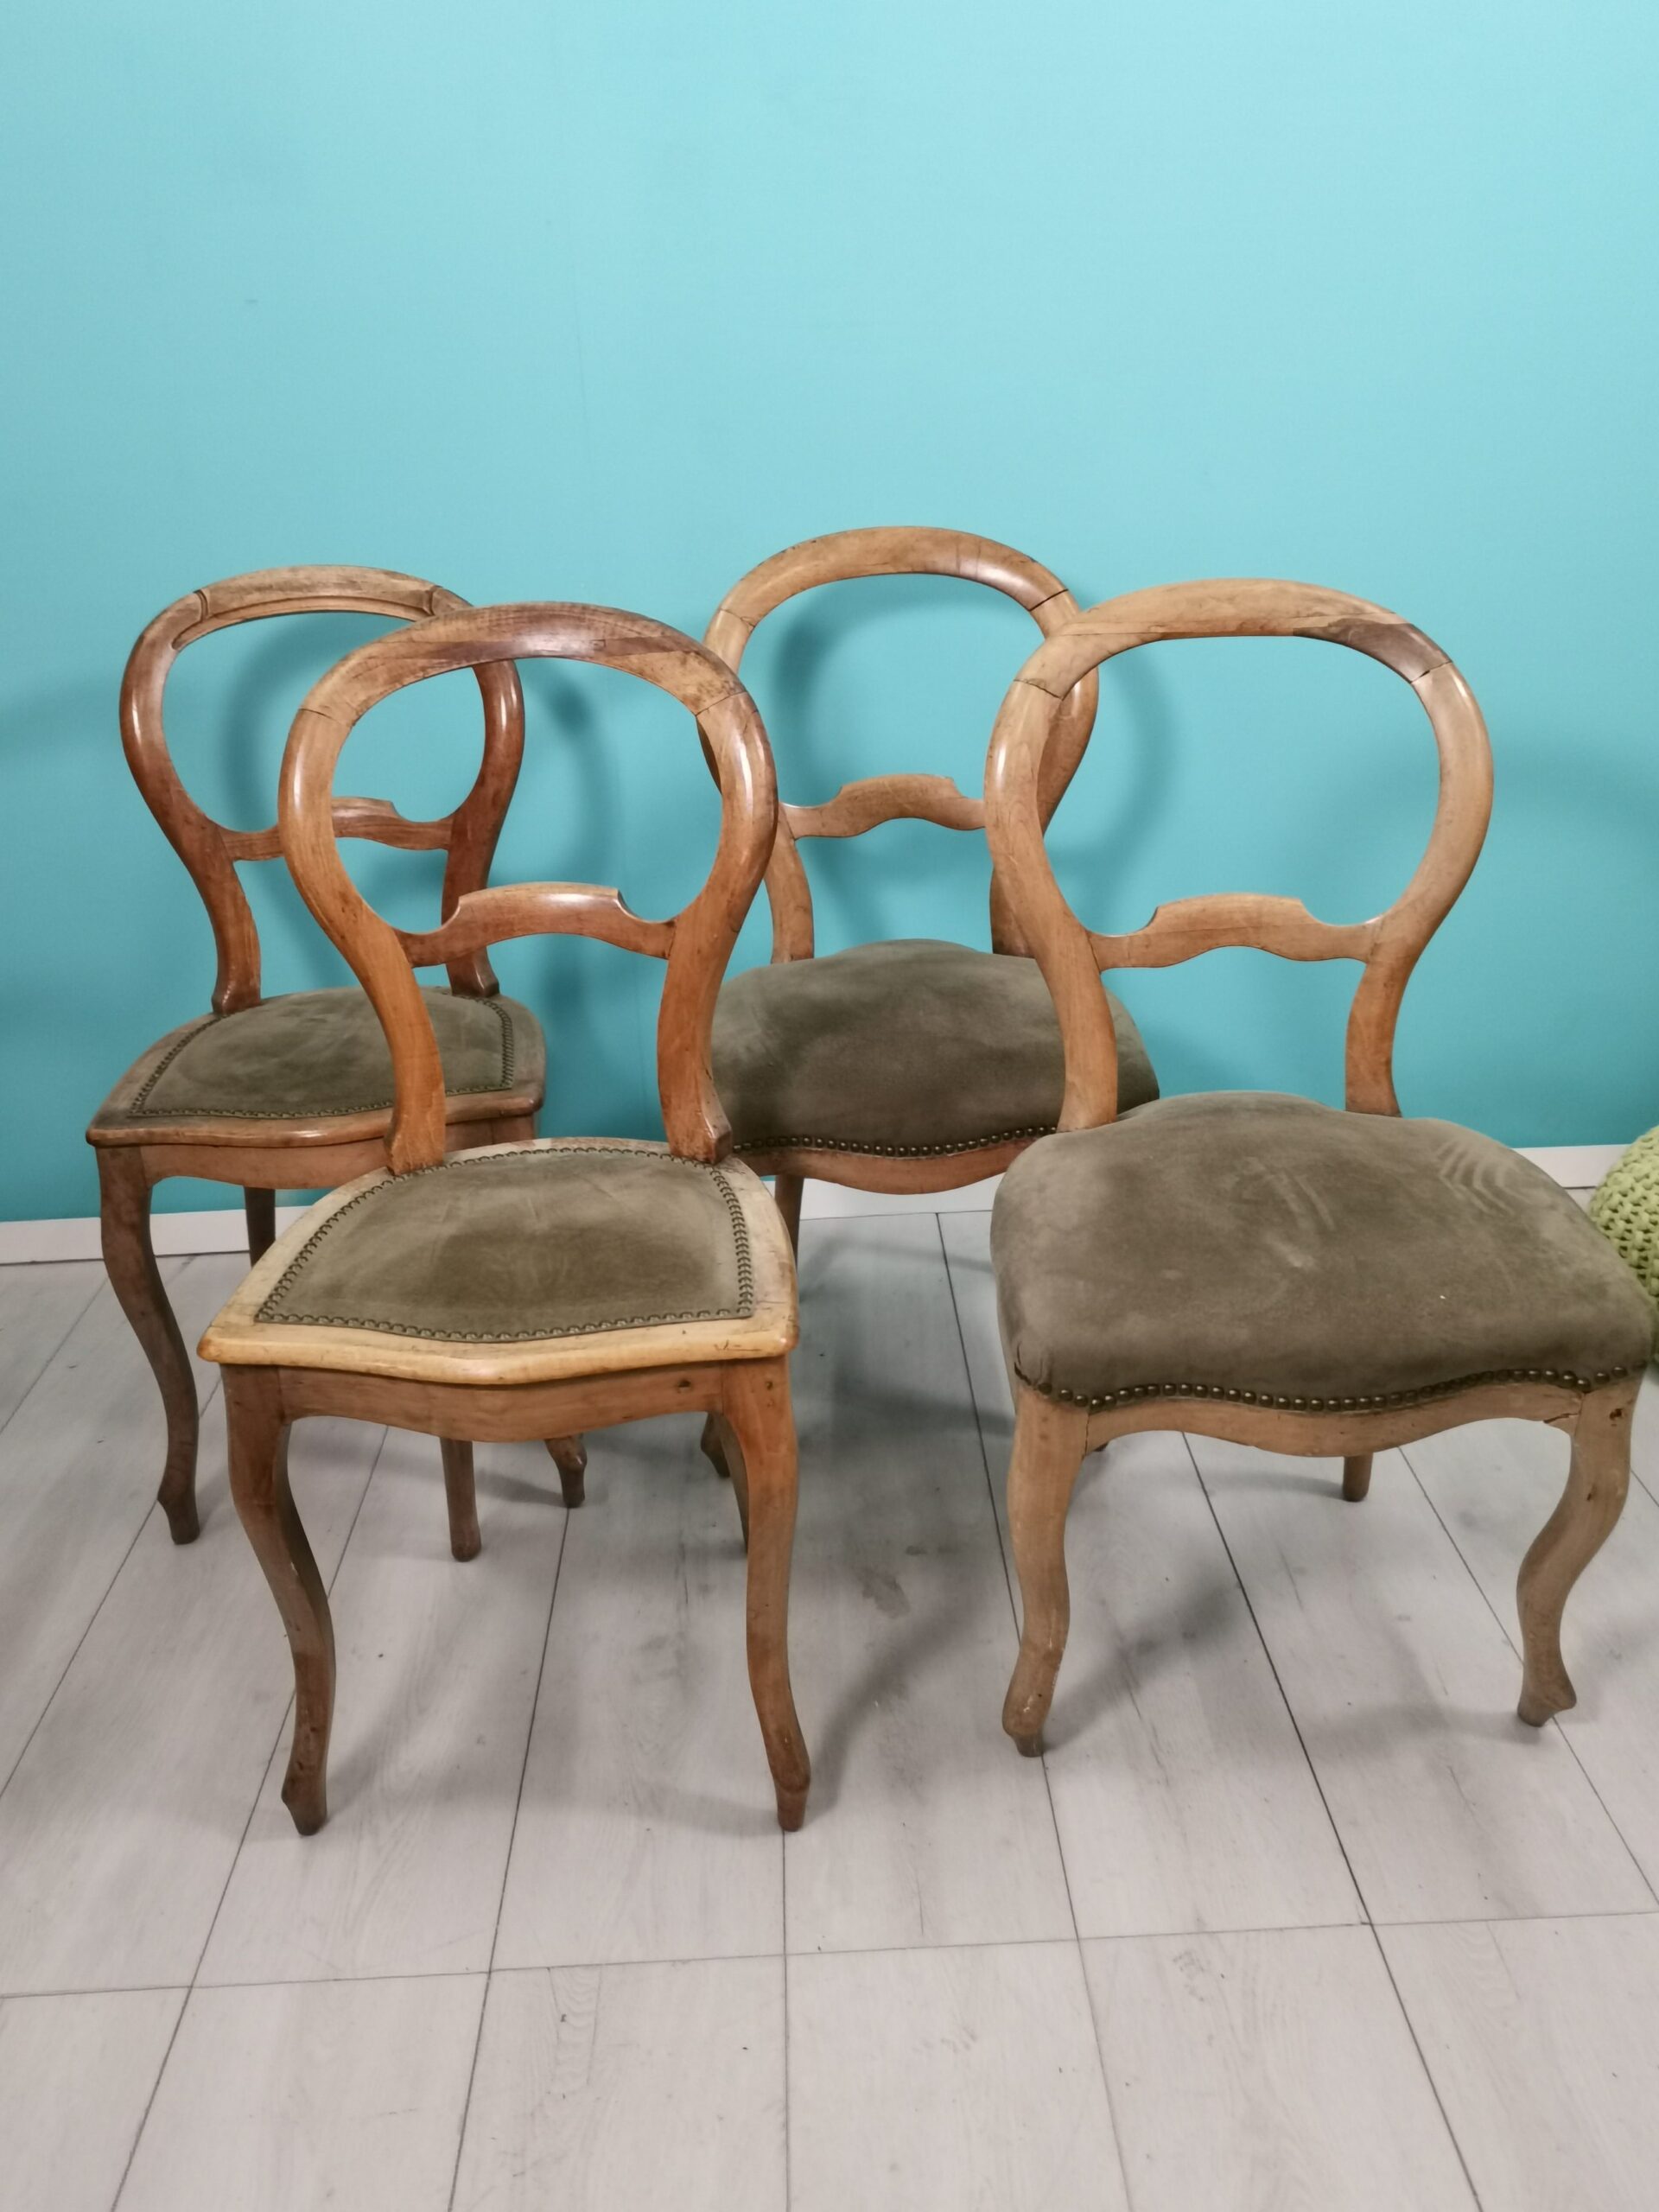 Louis Philippe Chairs from the 19th Century